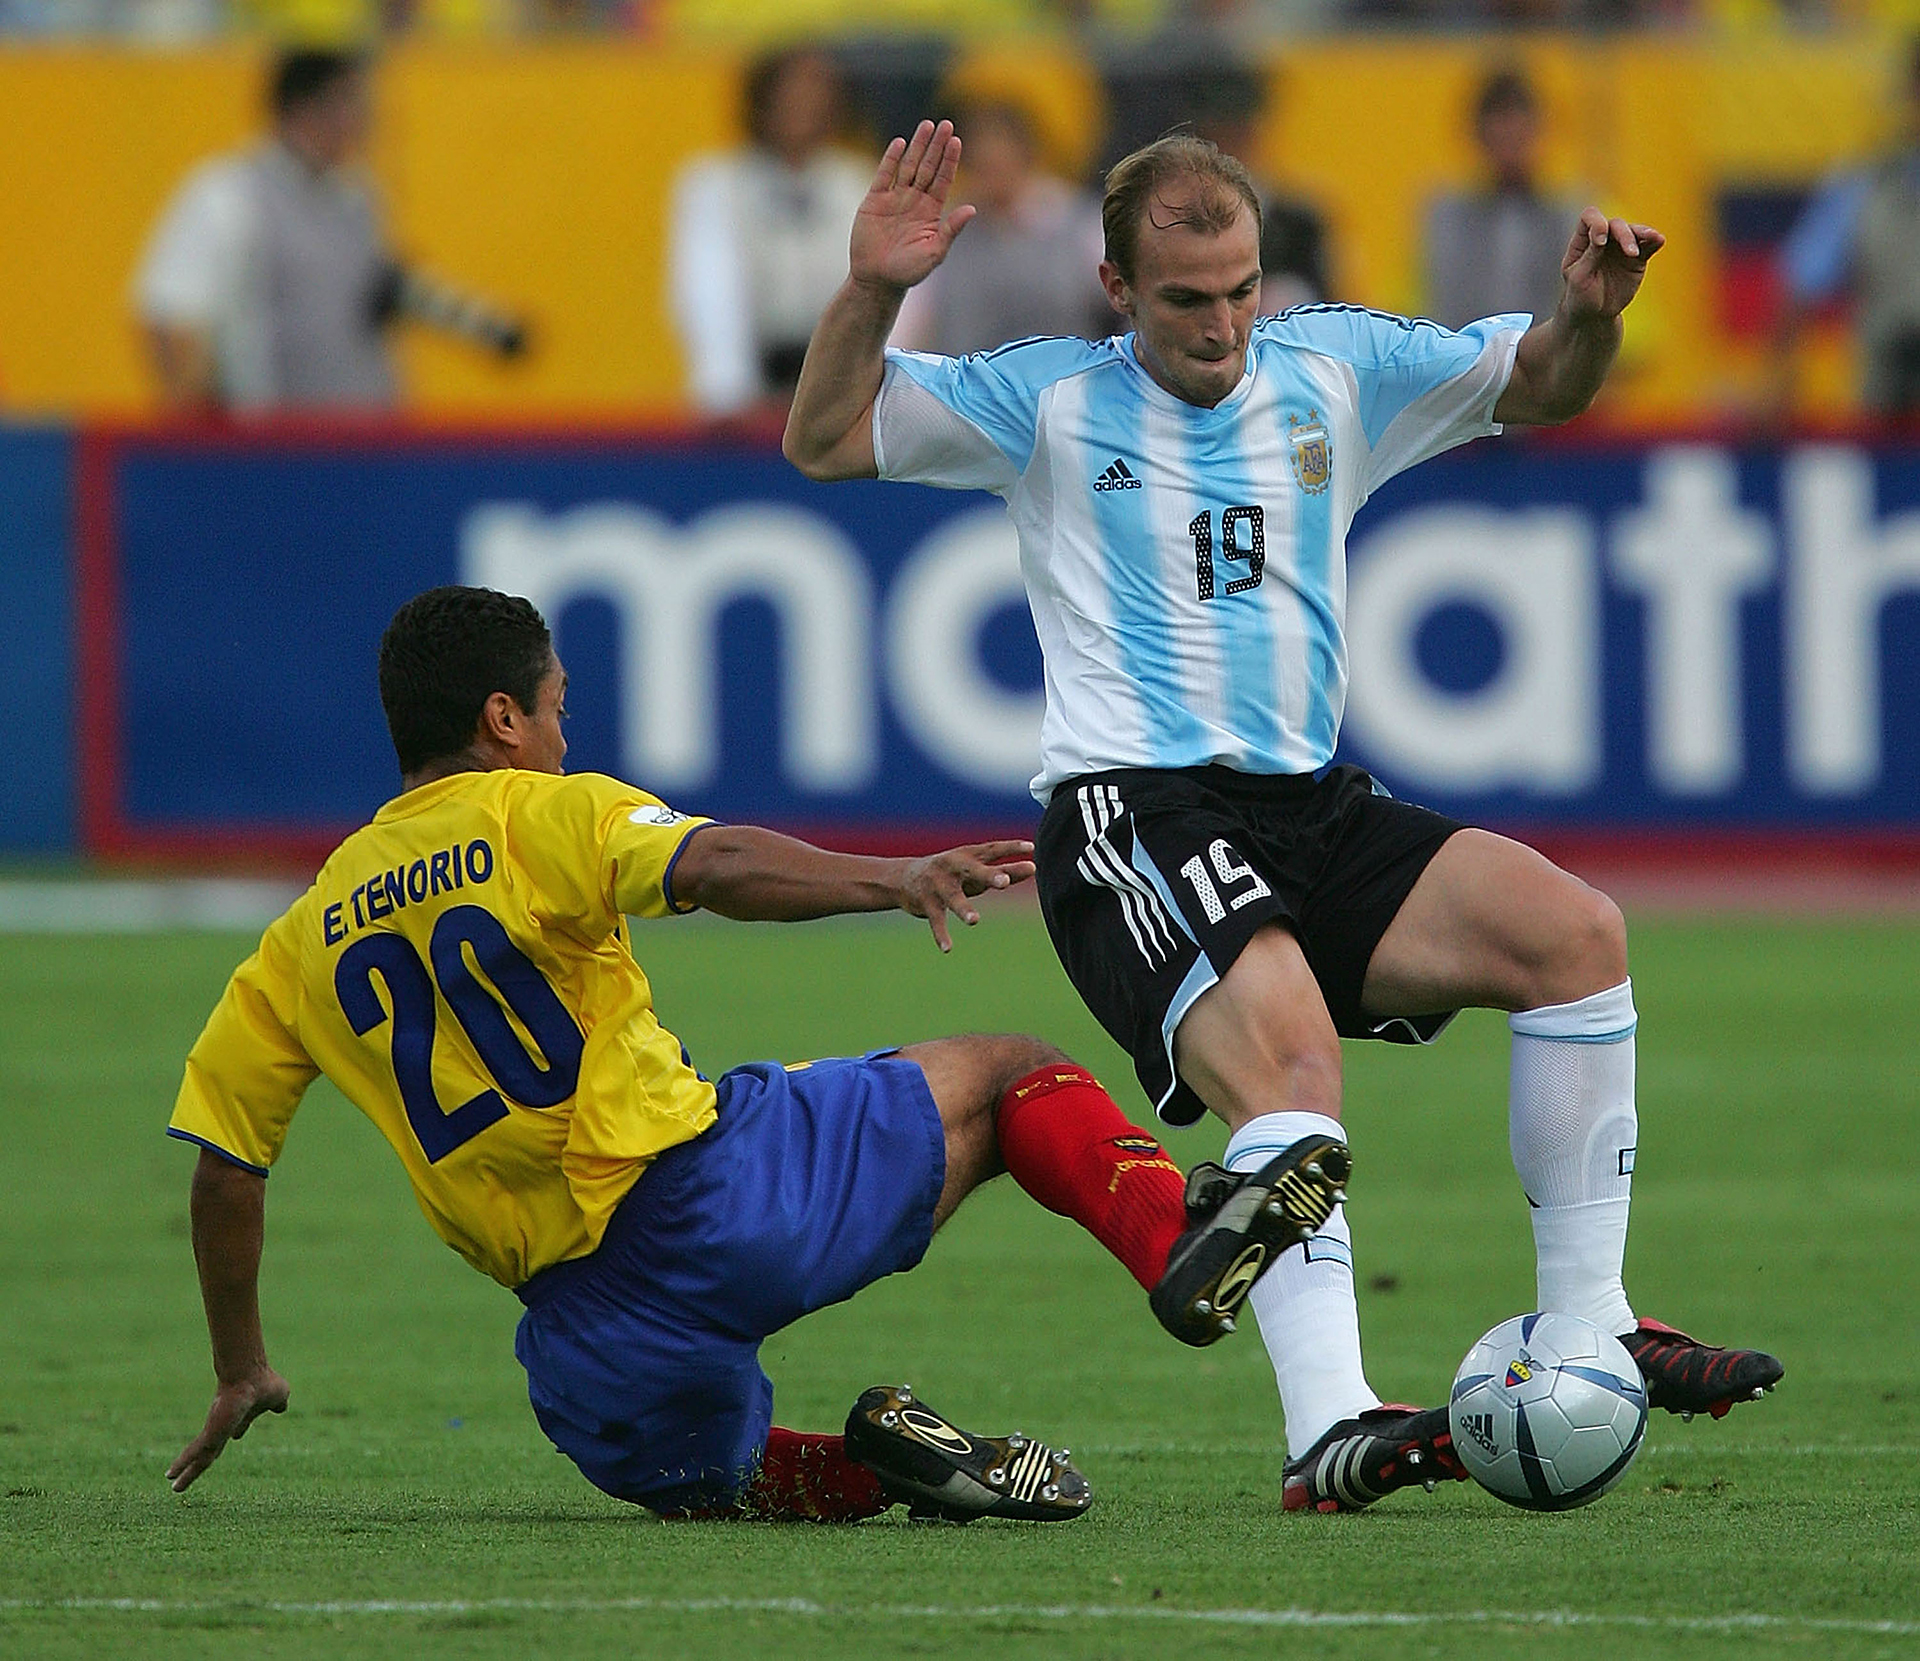 QUITO, ECUADOR -  JUNE 4:  Esteban Cambiasso #19 of Argentina is challenged by Edwin Tenorio #20 of Ecuador during the FIFA World Cup qualifying match between Ecuador and Argentina at the Atahualpa Olympic Stadium on June 4, 2005 in Quito, Ecuador. Ecuador defeated Argentina 2-0.  (Photo by Mike Hewitt/Getty Images)